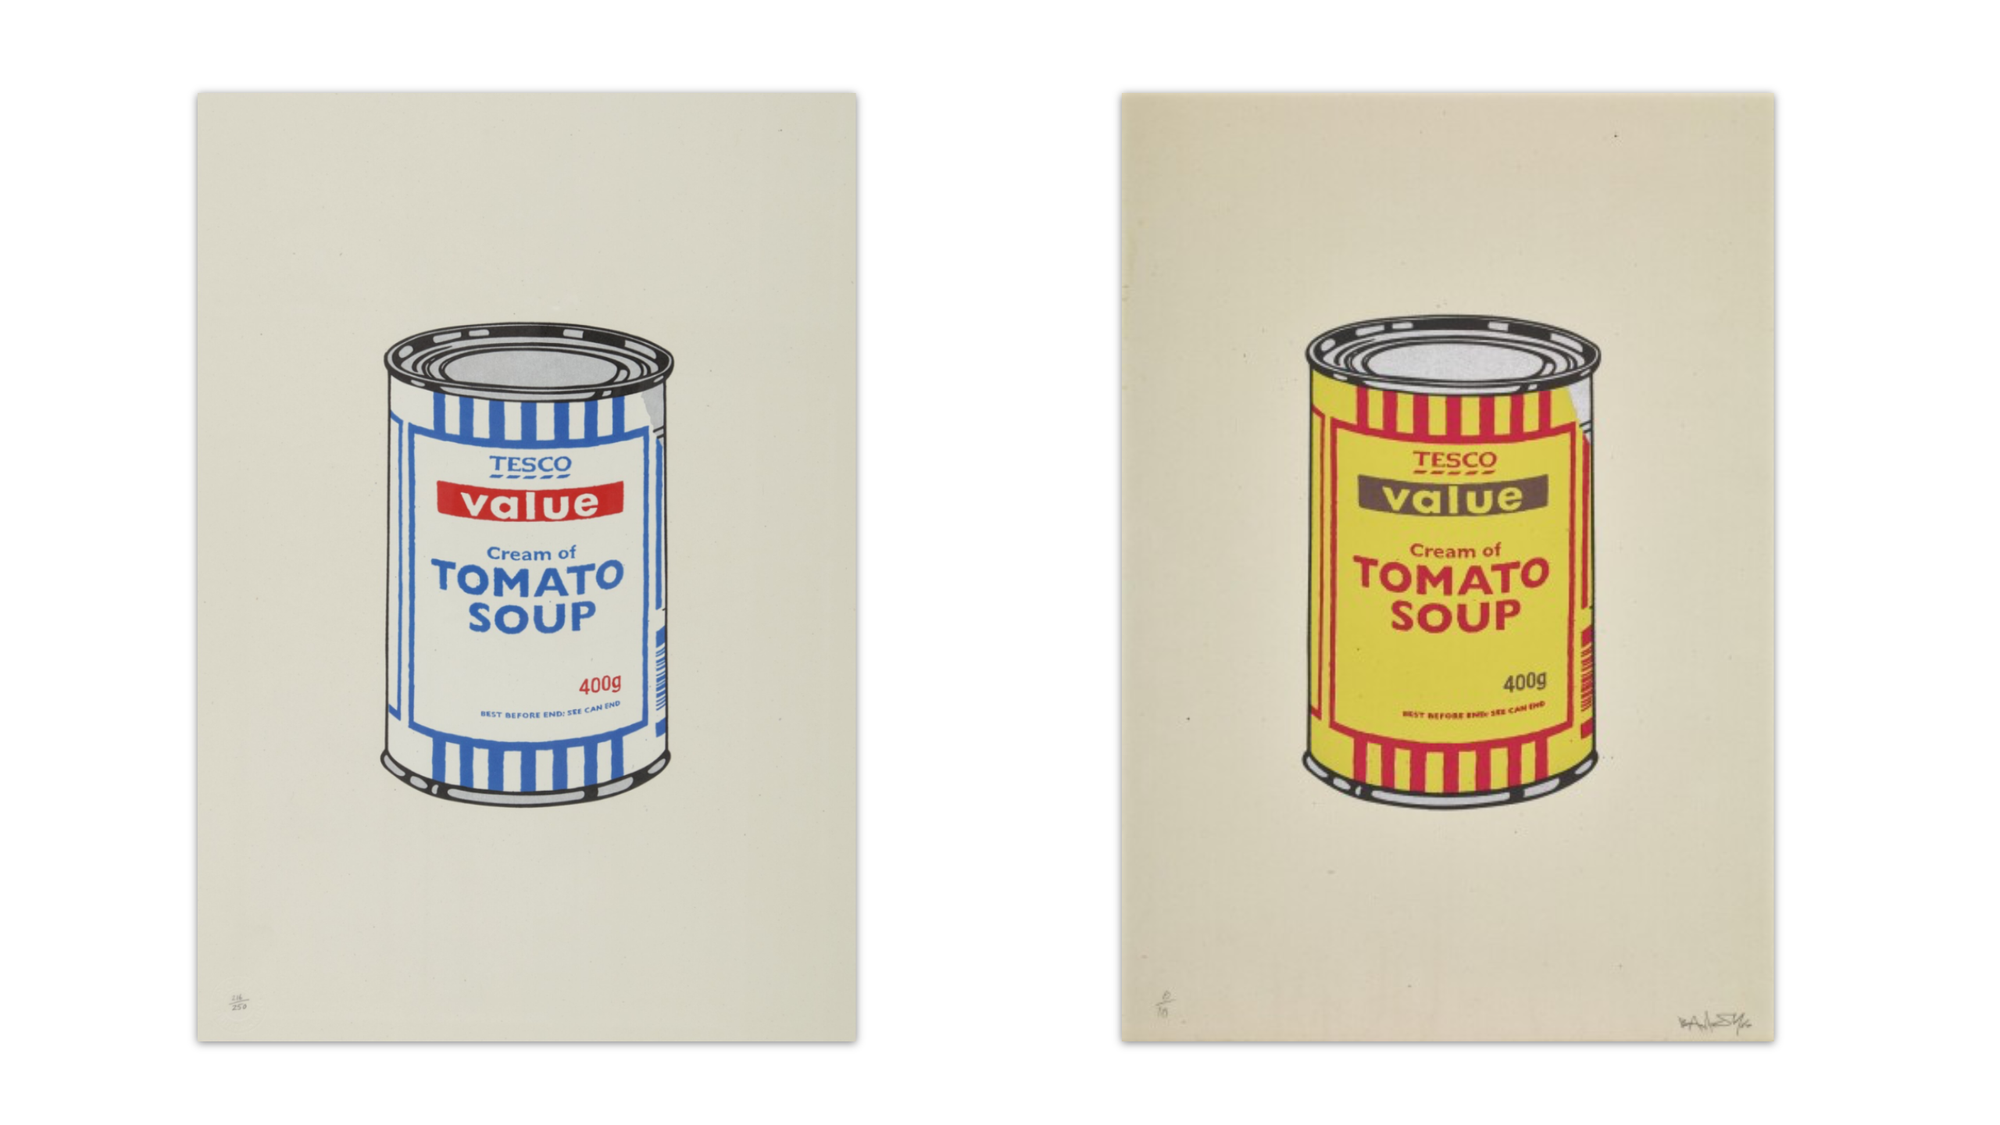 Two paintings of soup cans, one red, one blue. Artwork by Banksy.